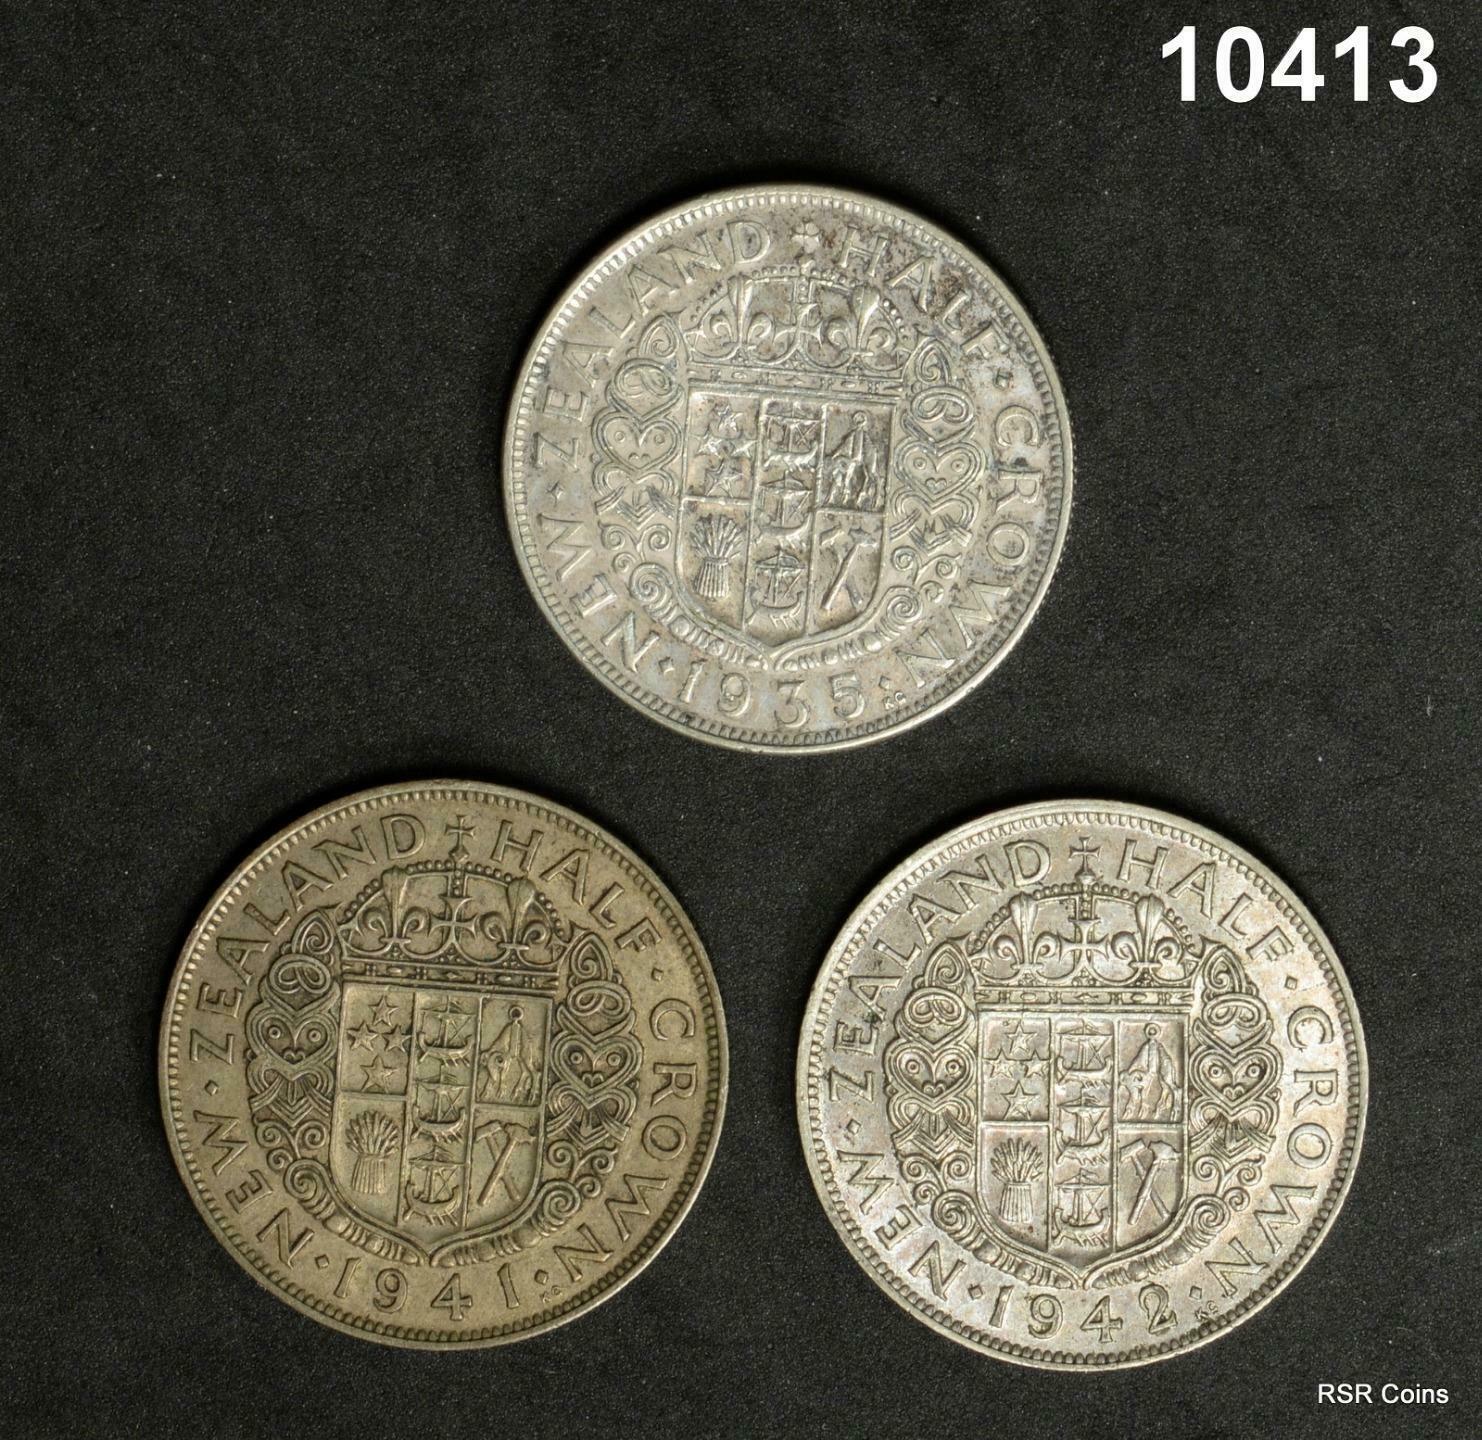 NEW ZEALAND SILVER HALF CROWNS 1935 XF, 1941, 1942 AU 3 COIN LOT!! #10413